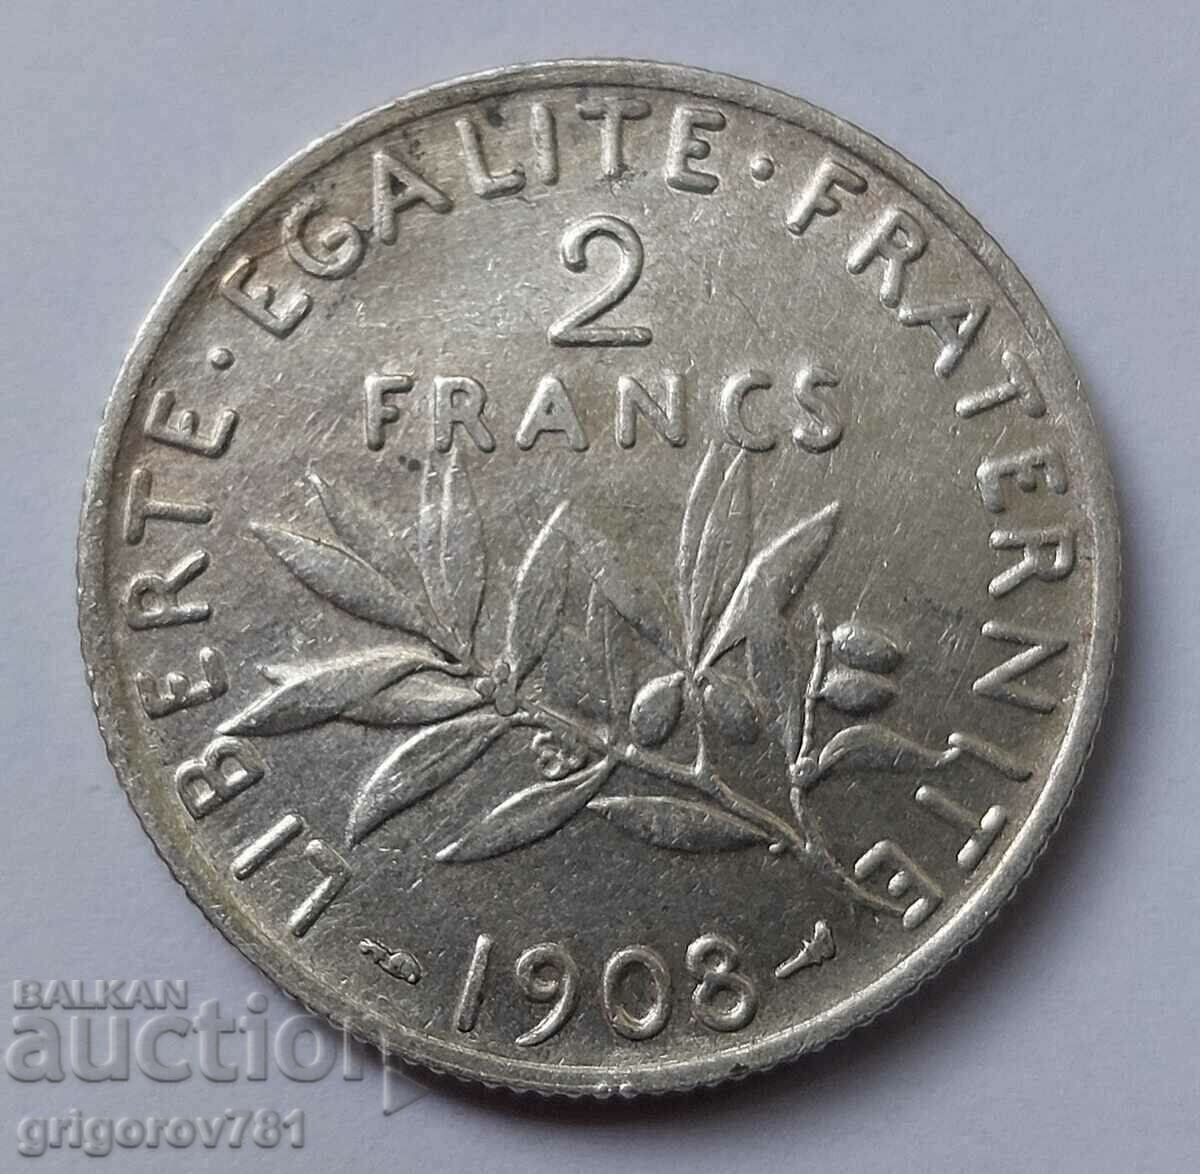 2 Francs Silver France 1908 - Silver Coin #35